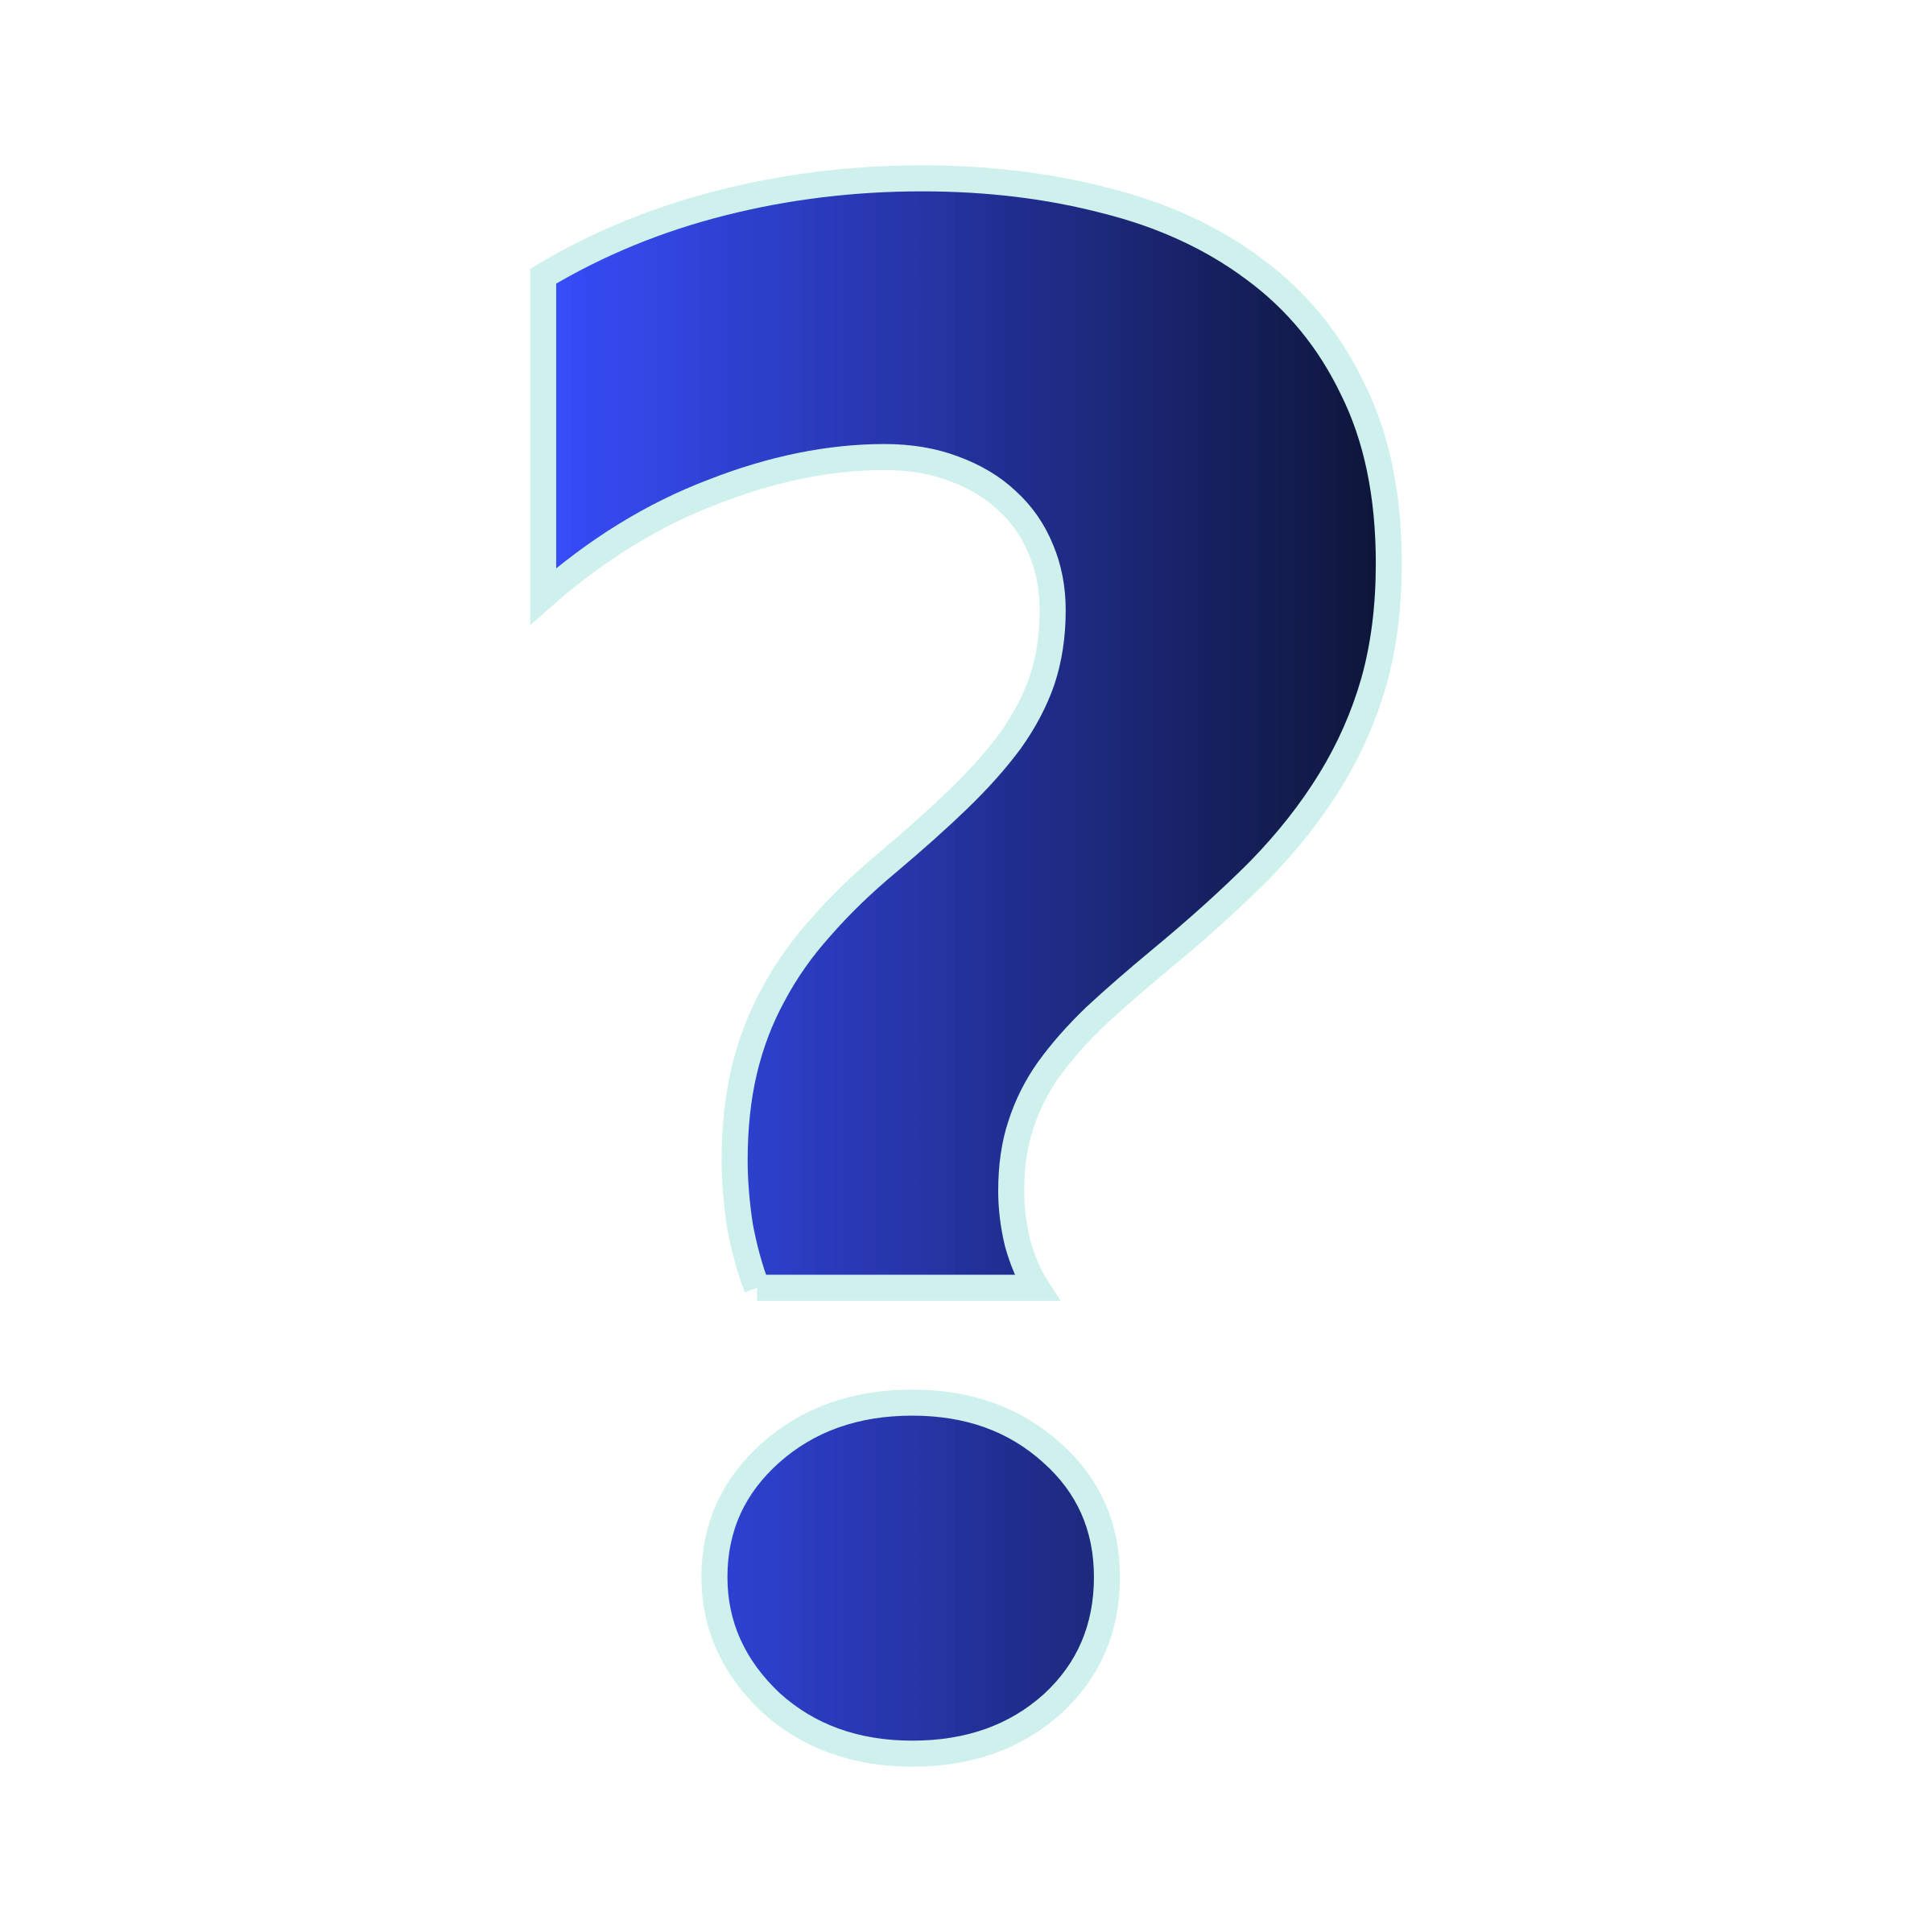 clipart picture of a question mark - photo #14